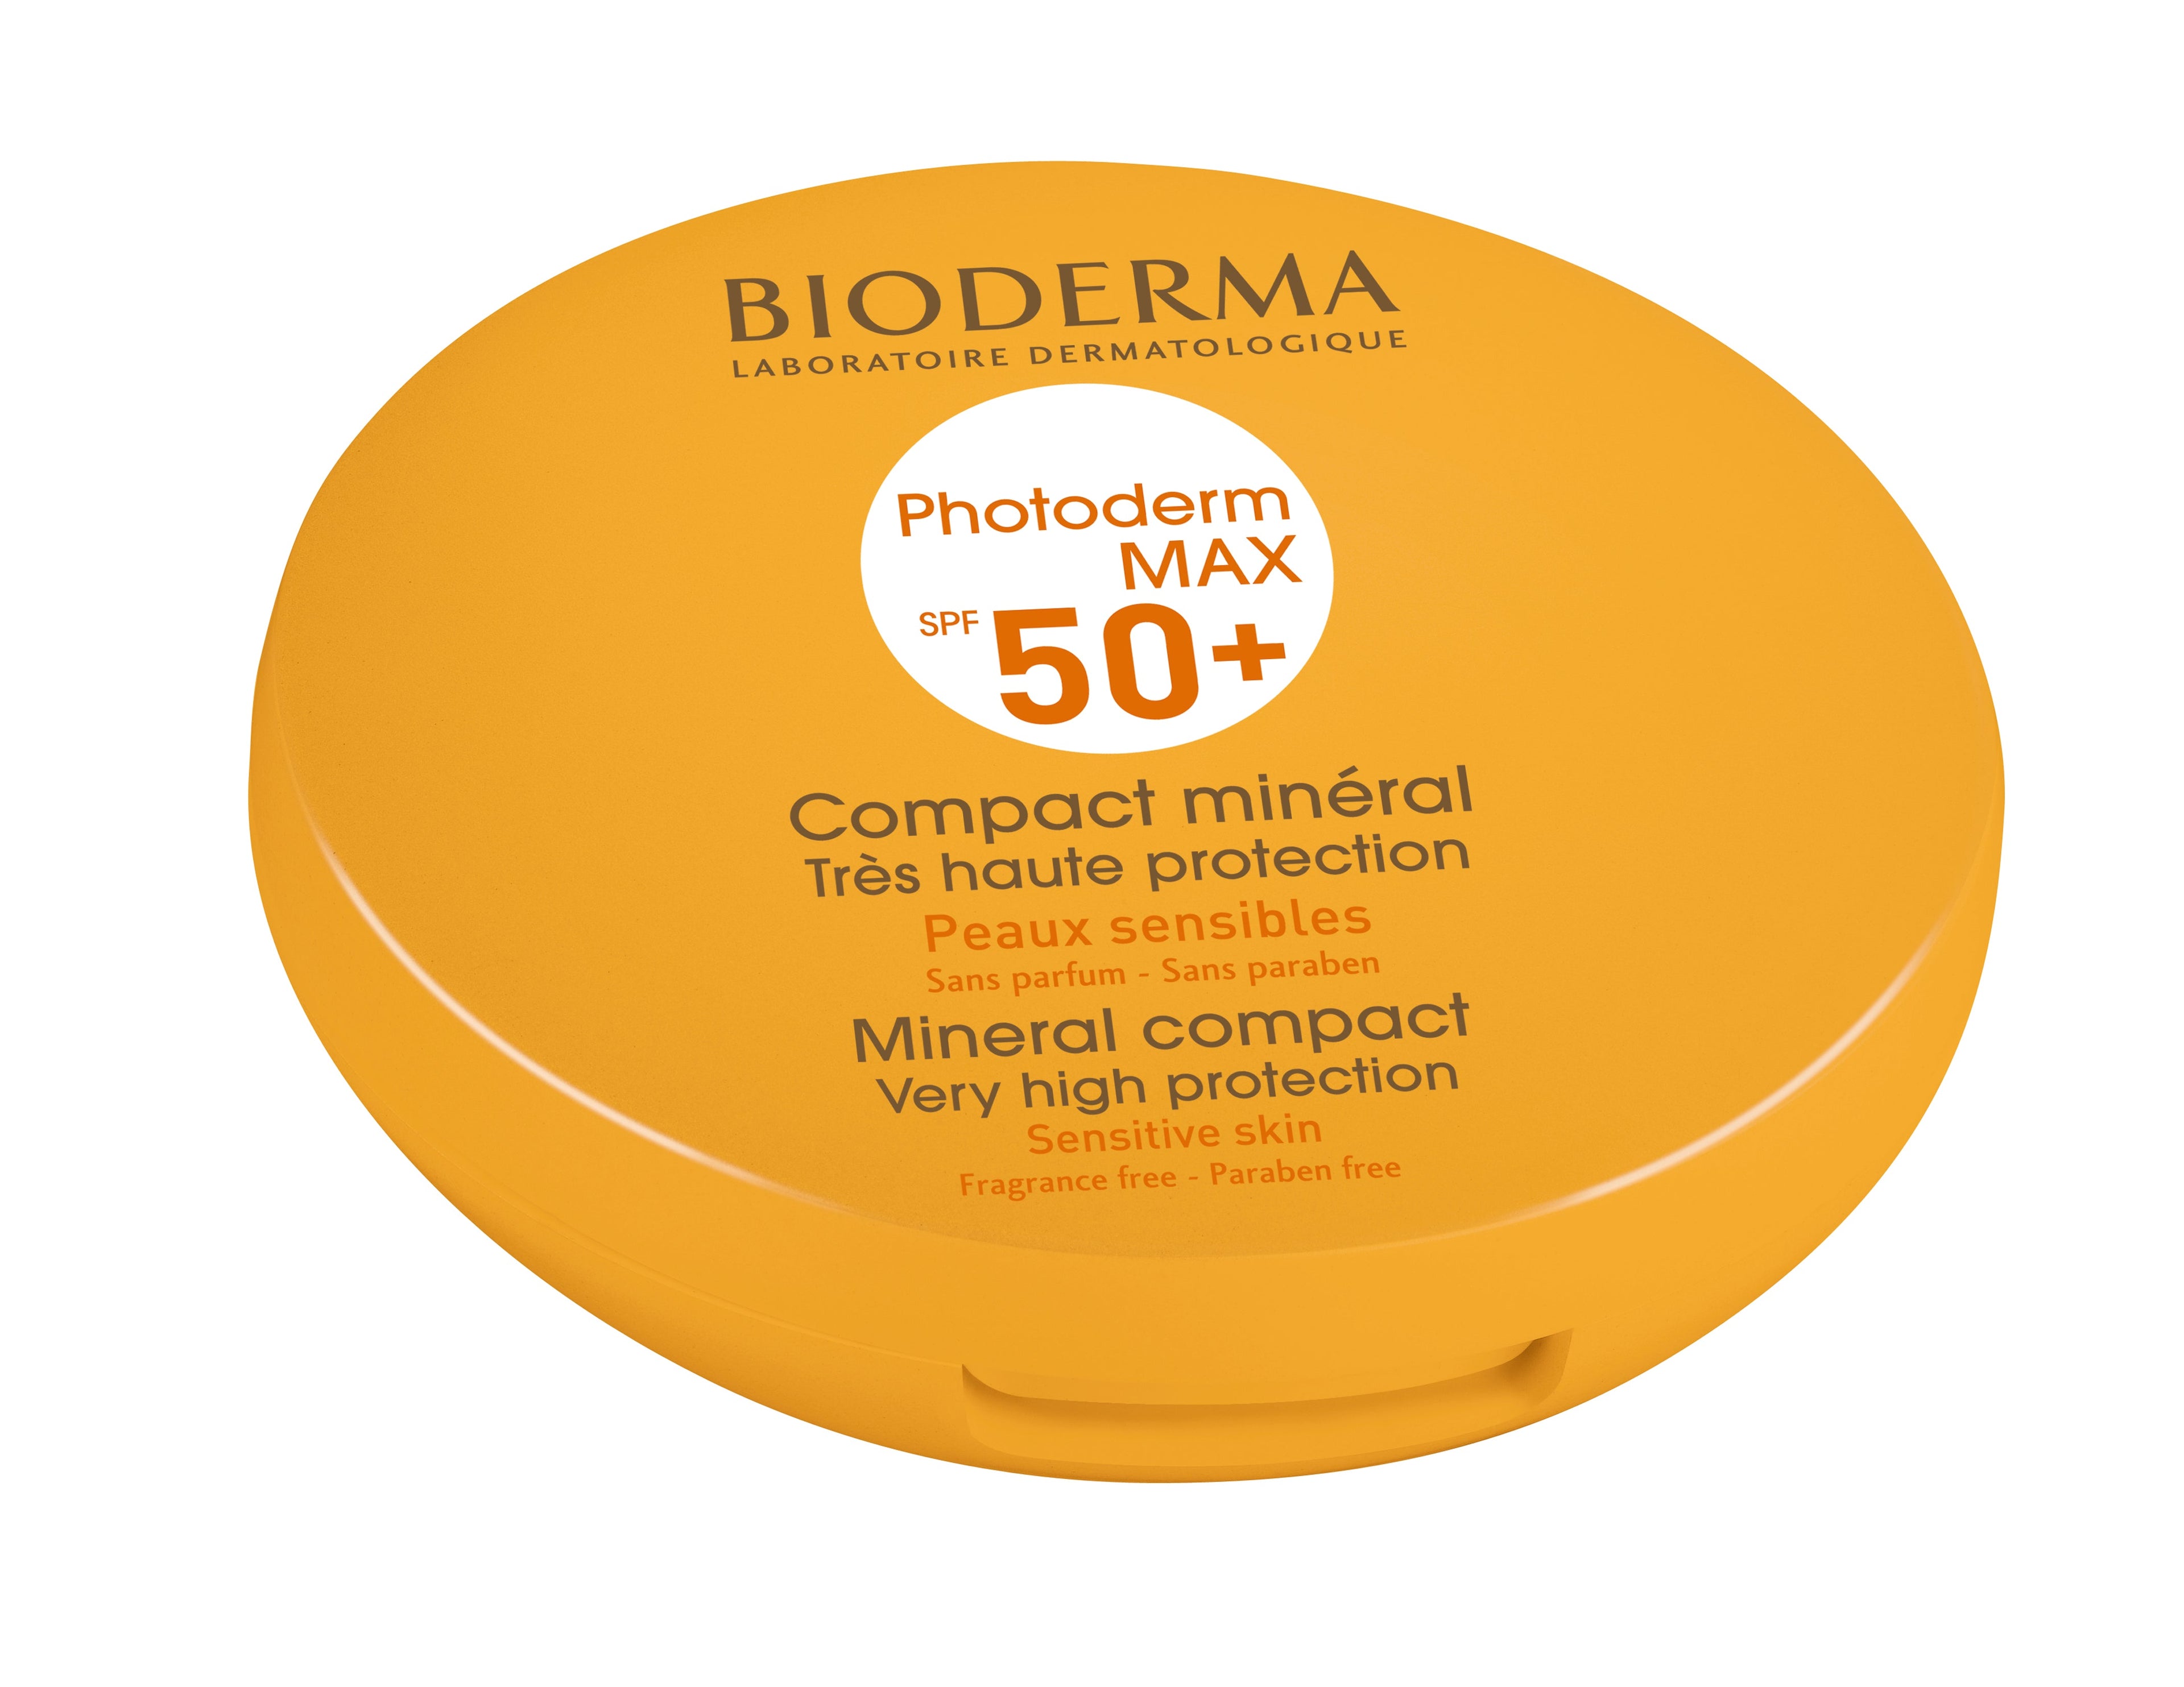 Bioderma Photoderm MAX Mineral Compact SPF50+ Light Tint for Allergic Skin, 10g